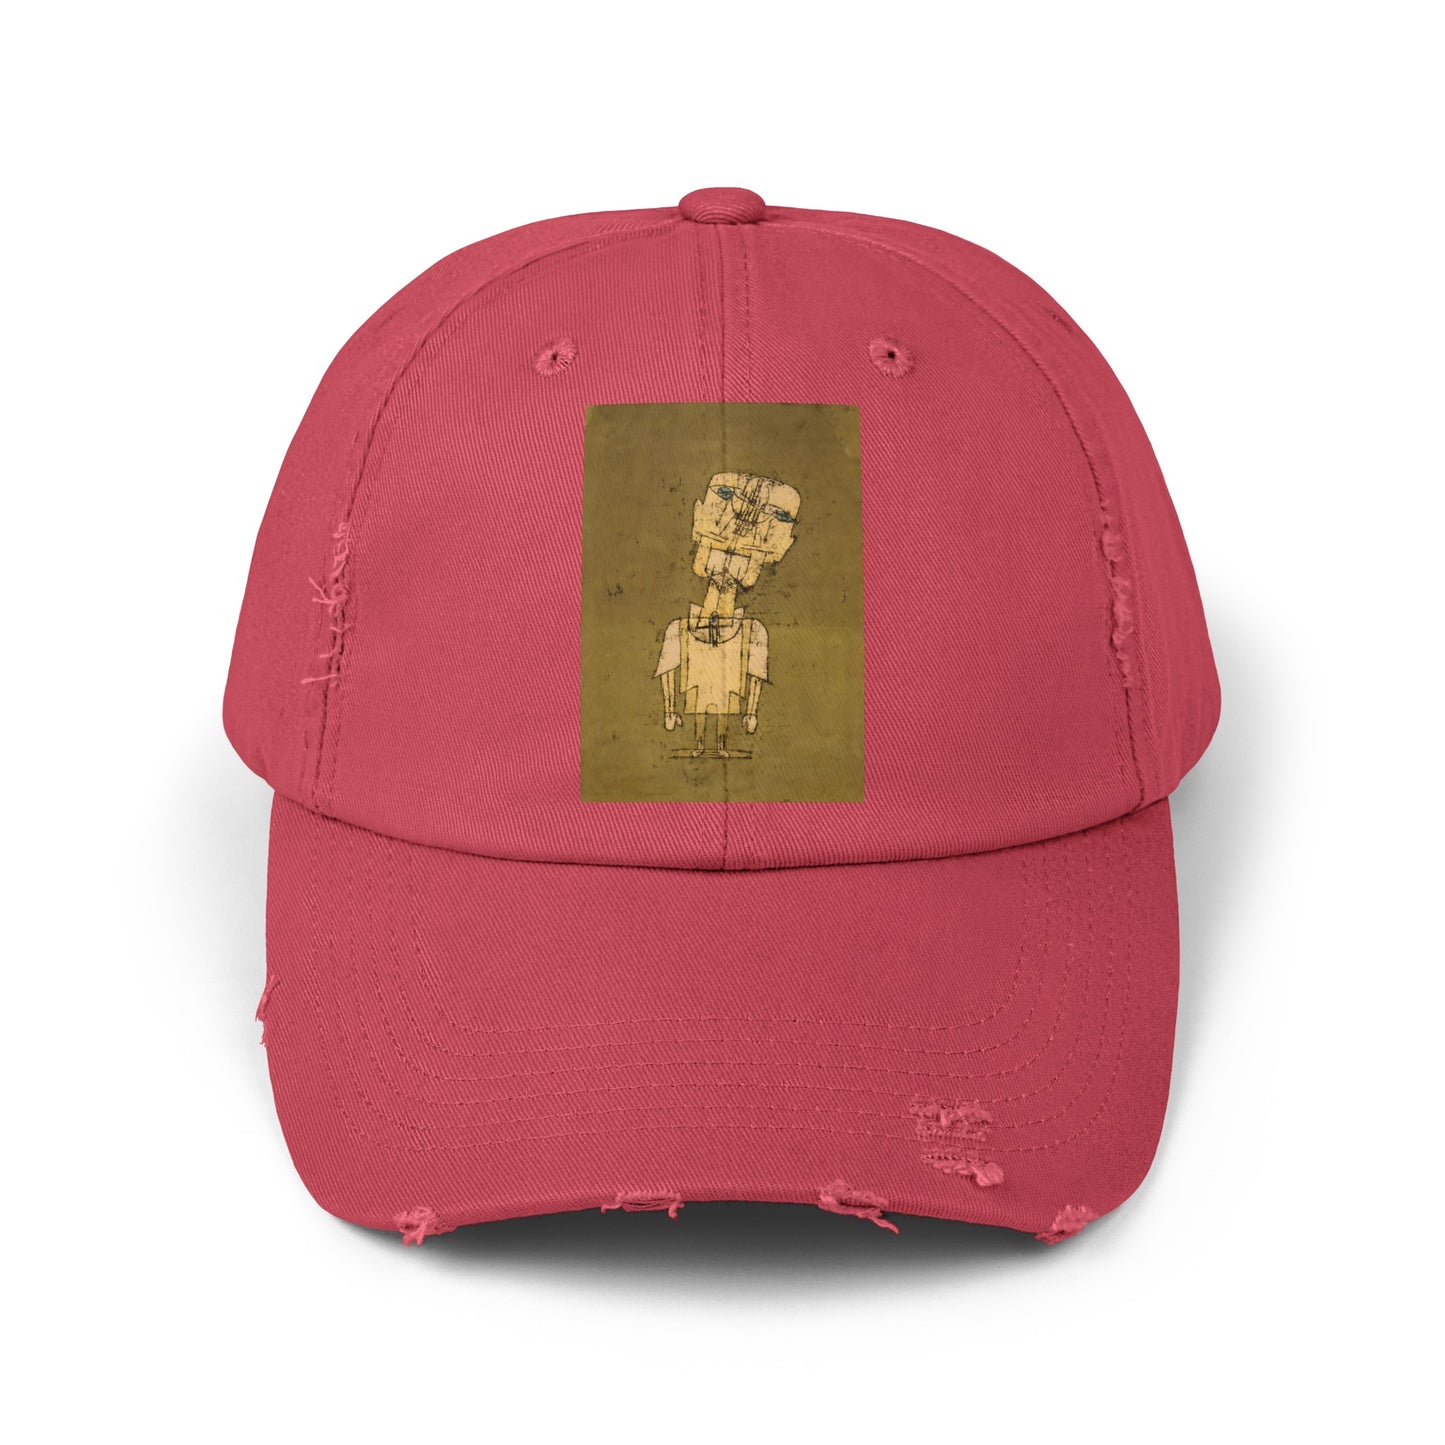 a red baseball cap with a picture of a man on it